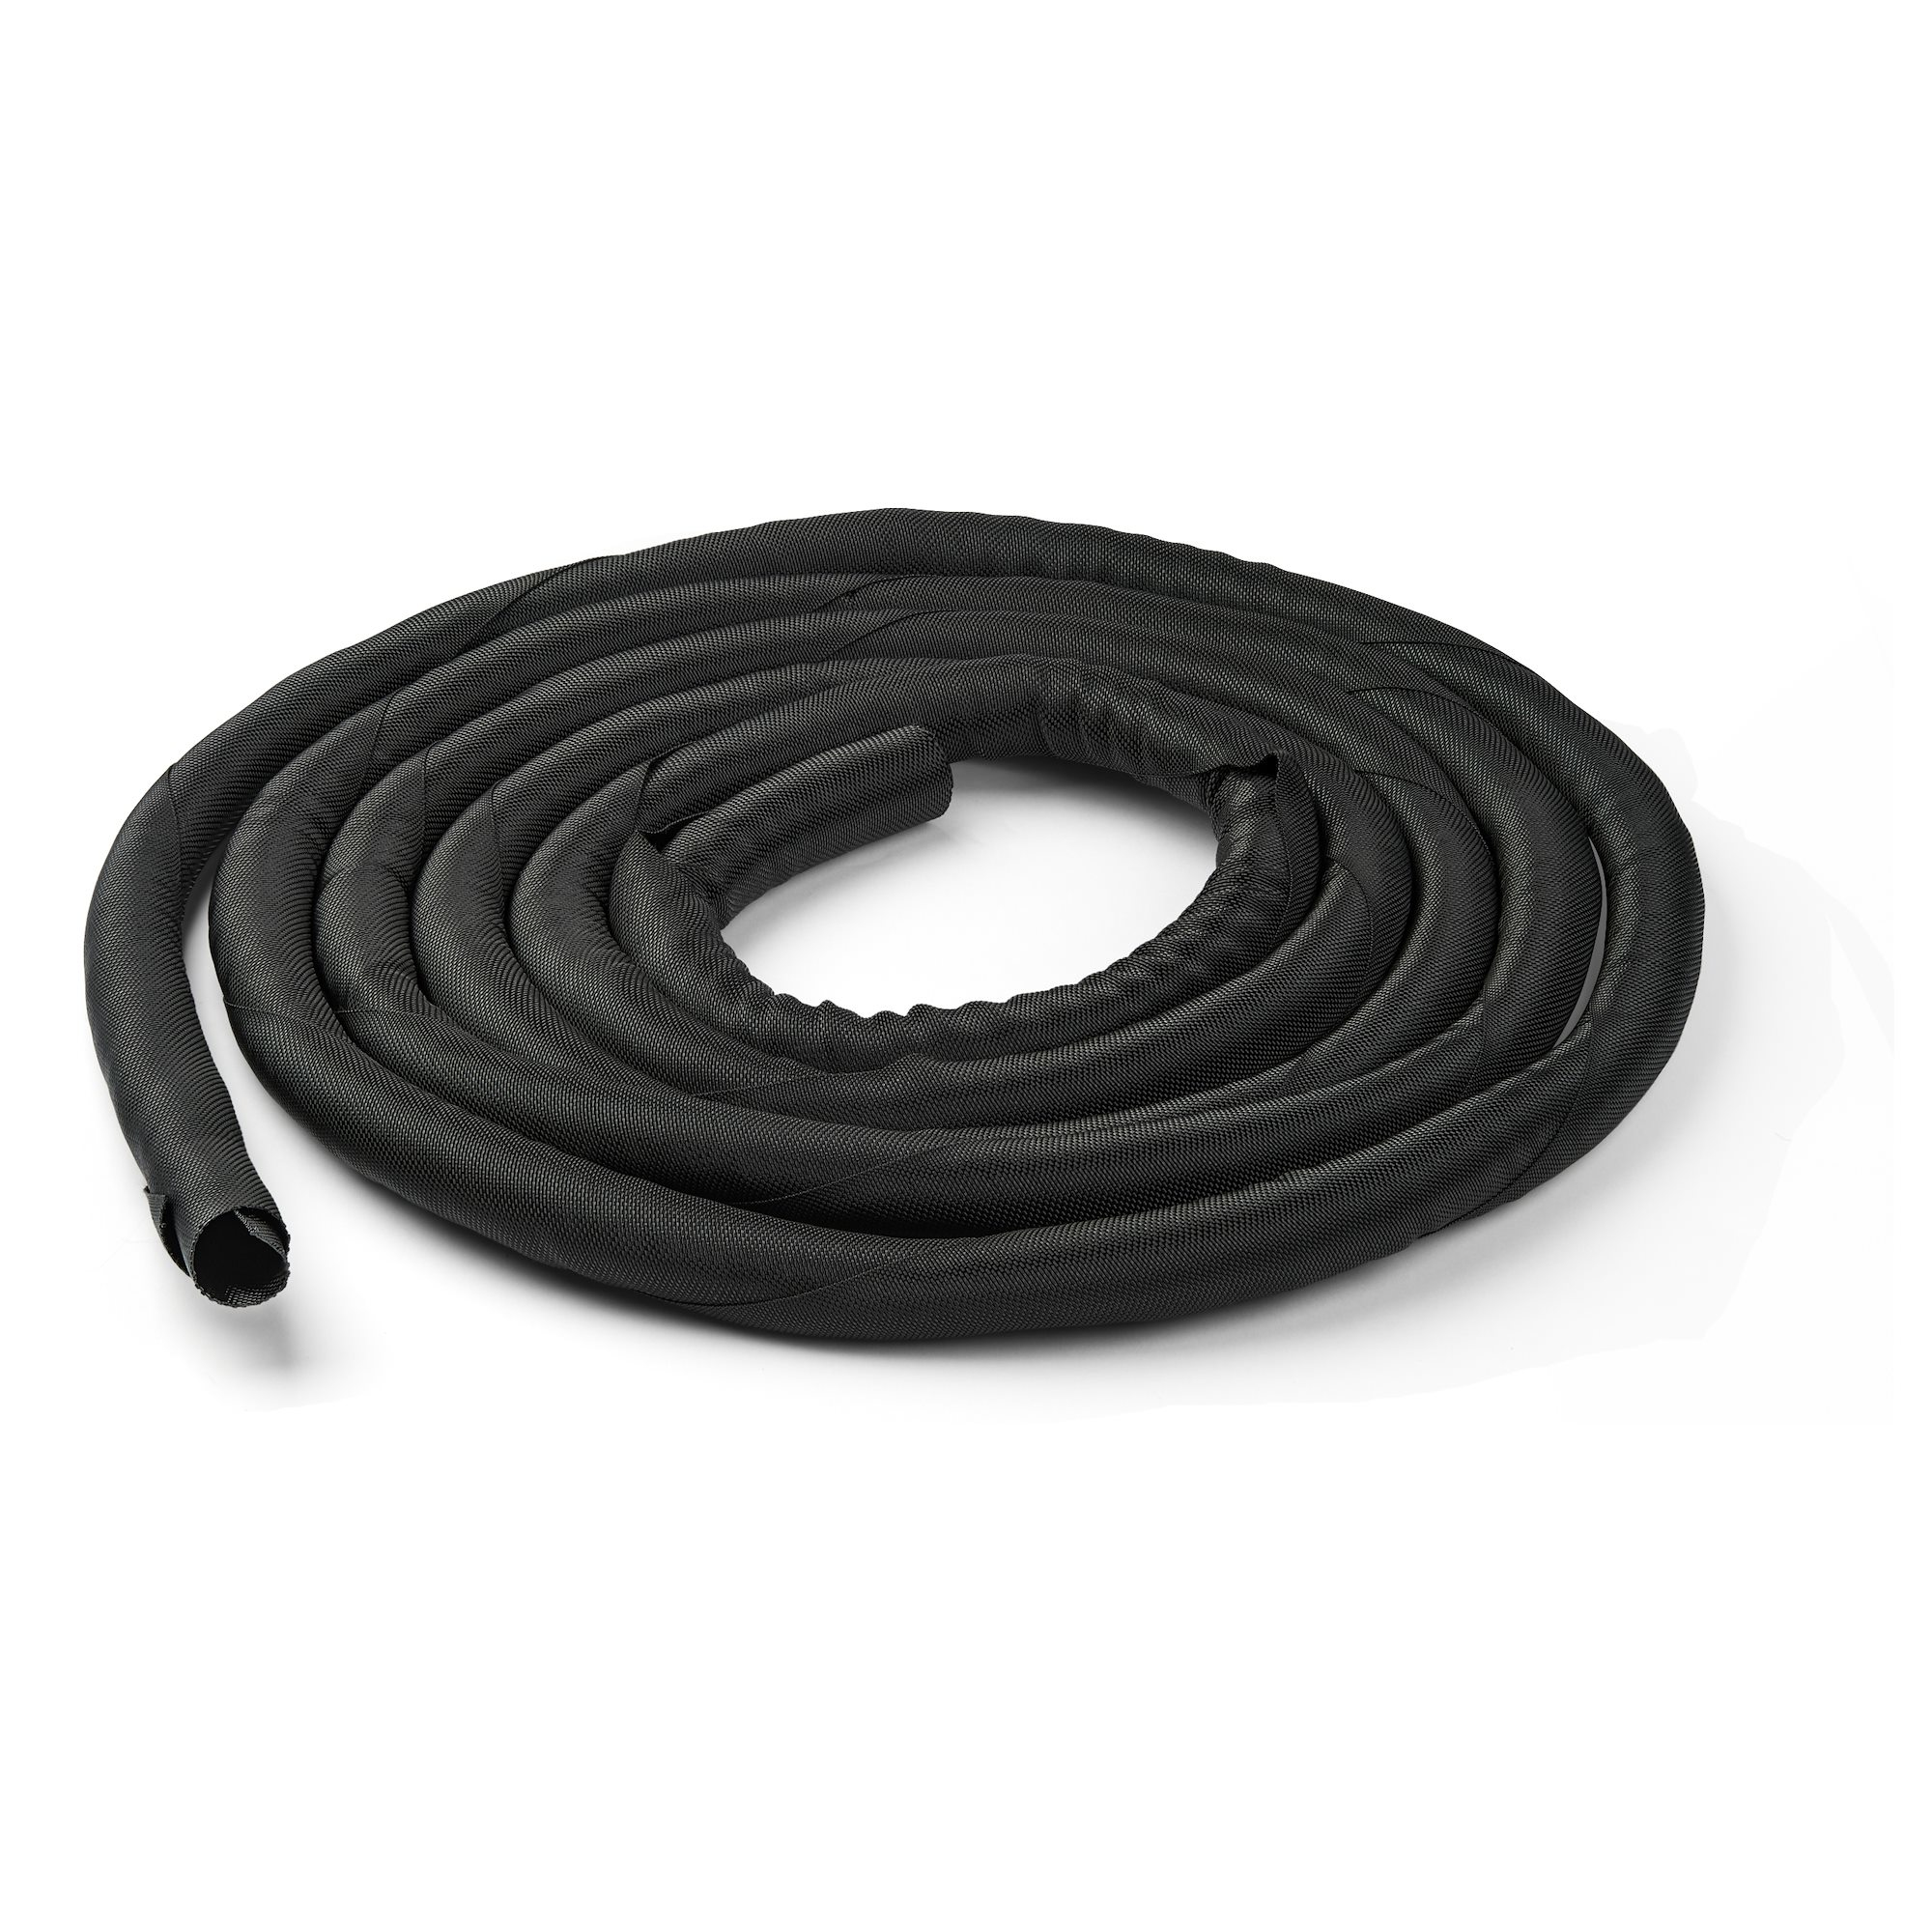 StarTech.com 15' (4.6m) Cable Management Sleeve, Flexible Coiled Cable Wrap, 1-1.5" diameter Expandable Sleeve, Polyester Cord Manager/Protector/Concealer, Black Trimmable Cable Organizer - Cable & Wire Hider (WKSTNCM2)